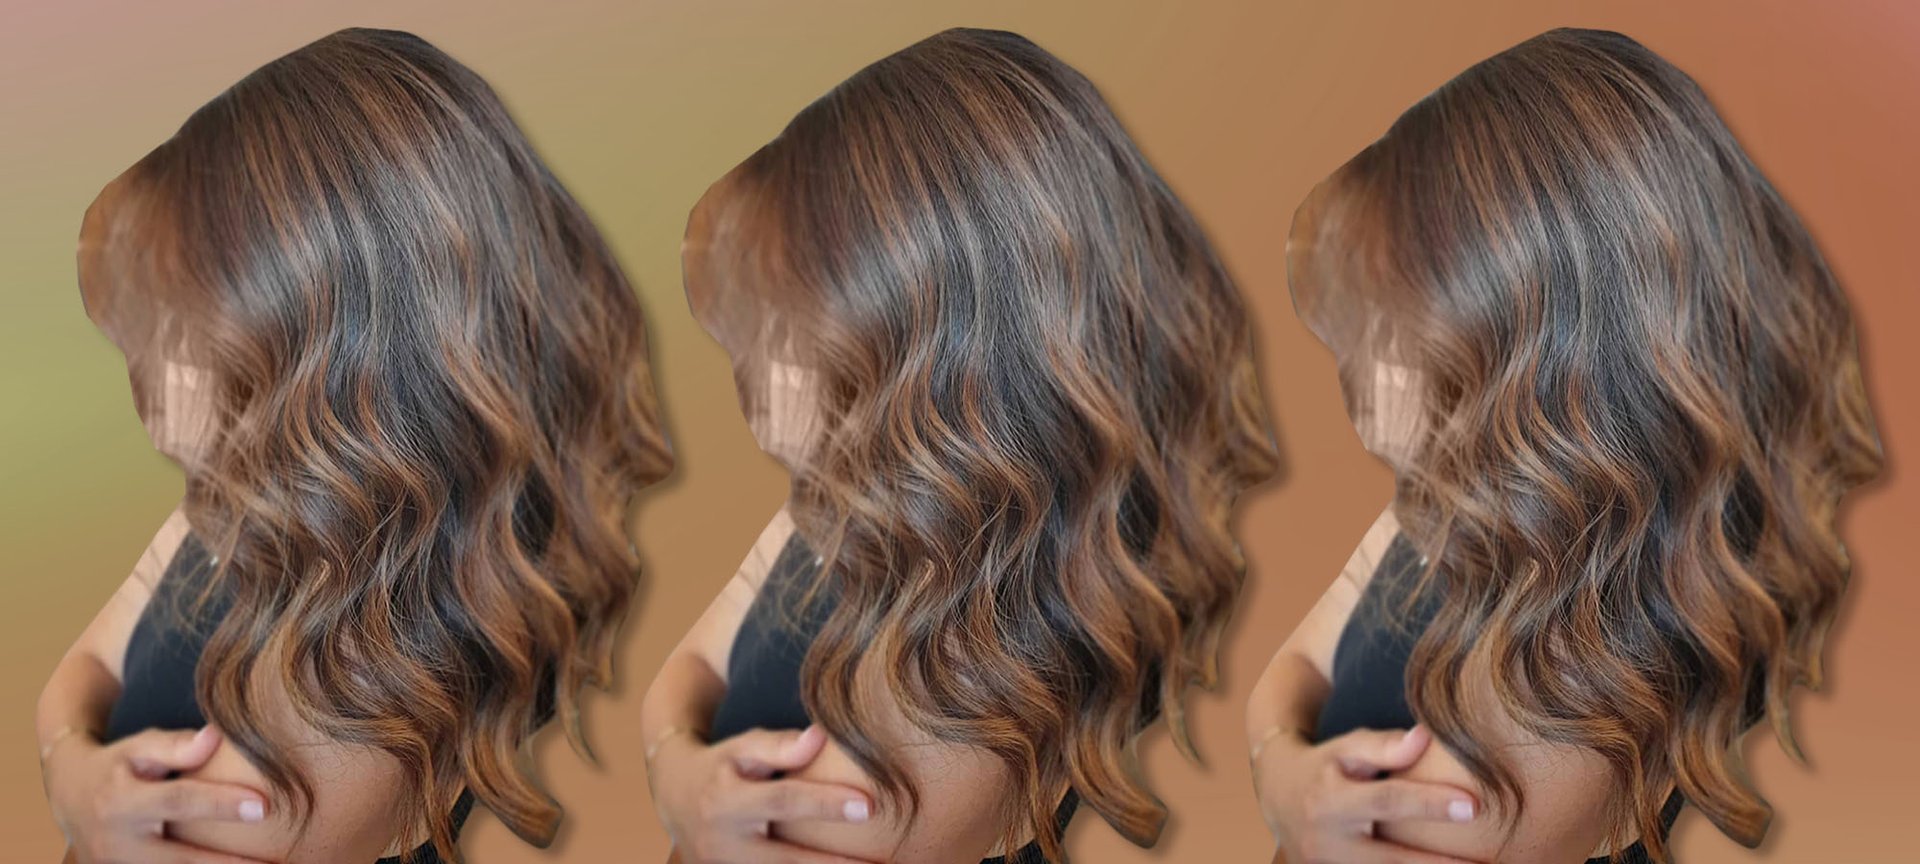 12 chunky highlight hair colours to inspire you to try the trend